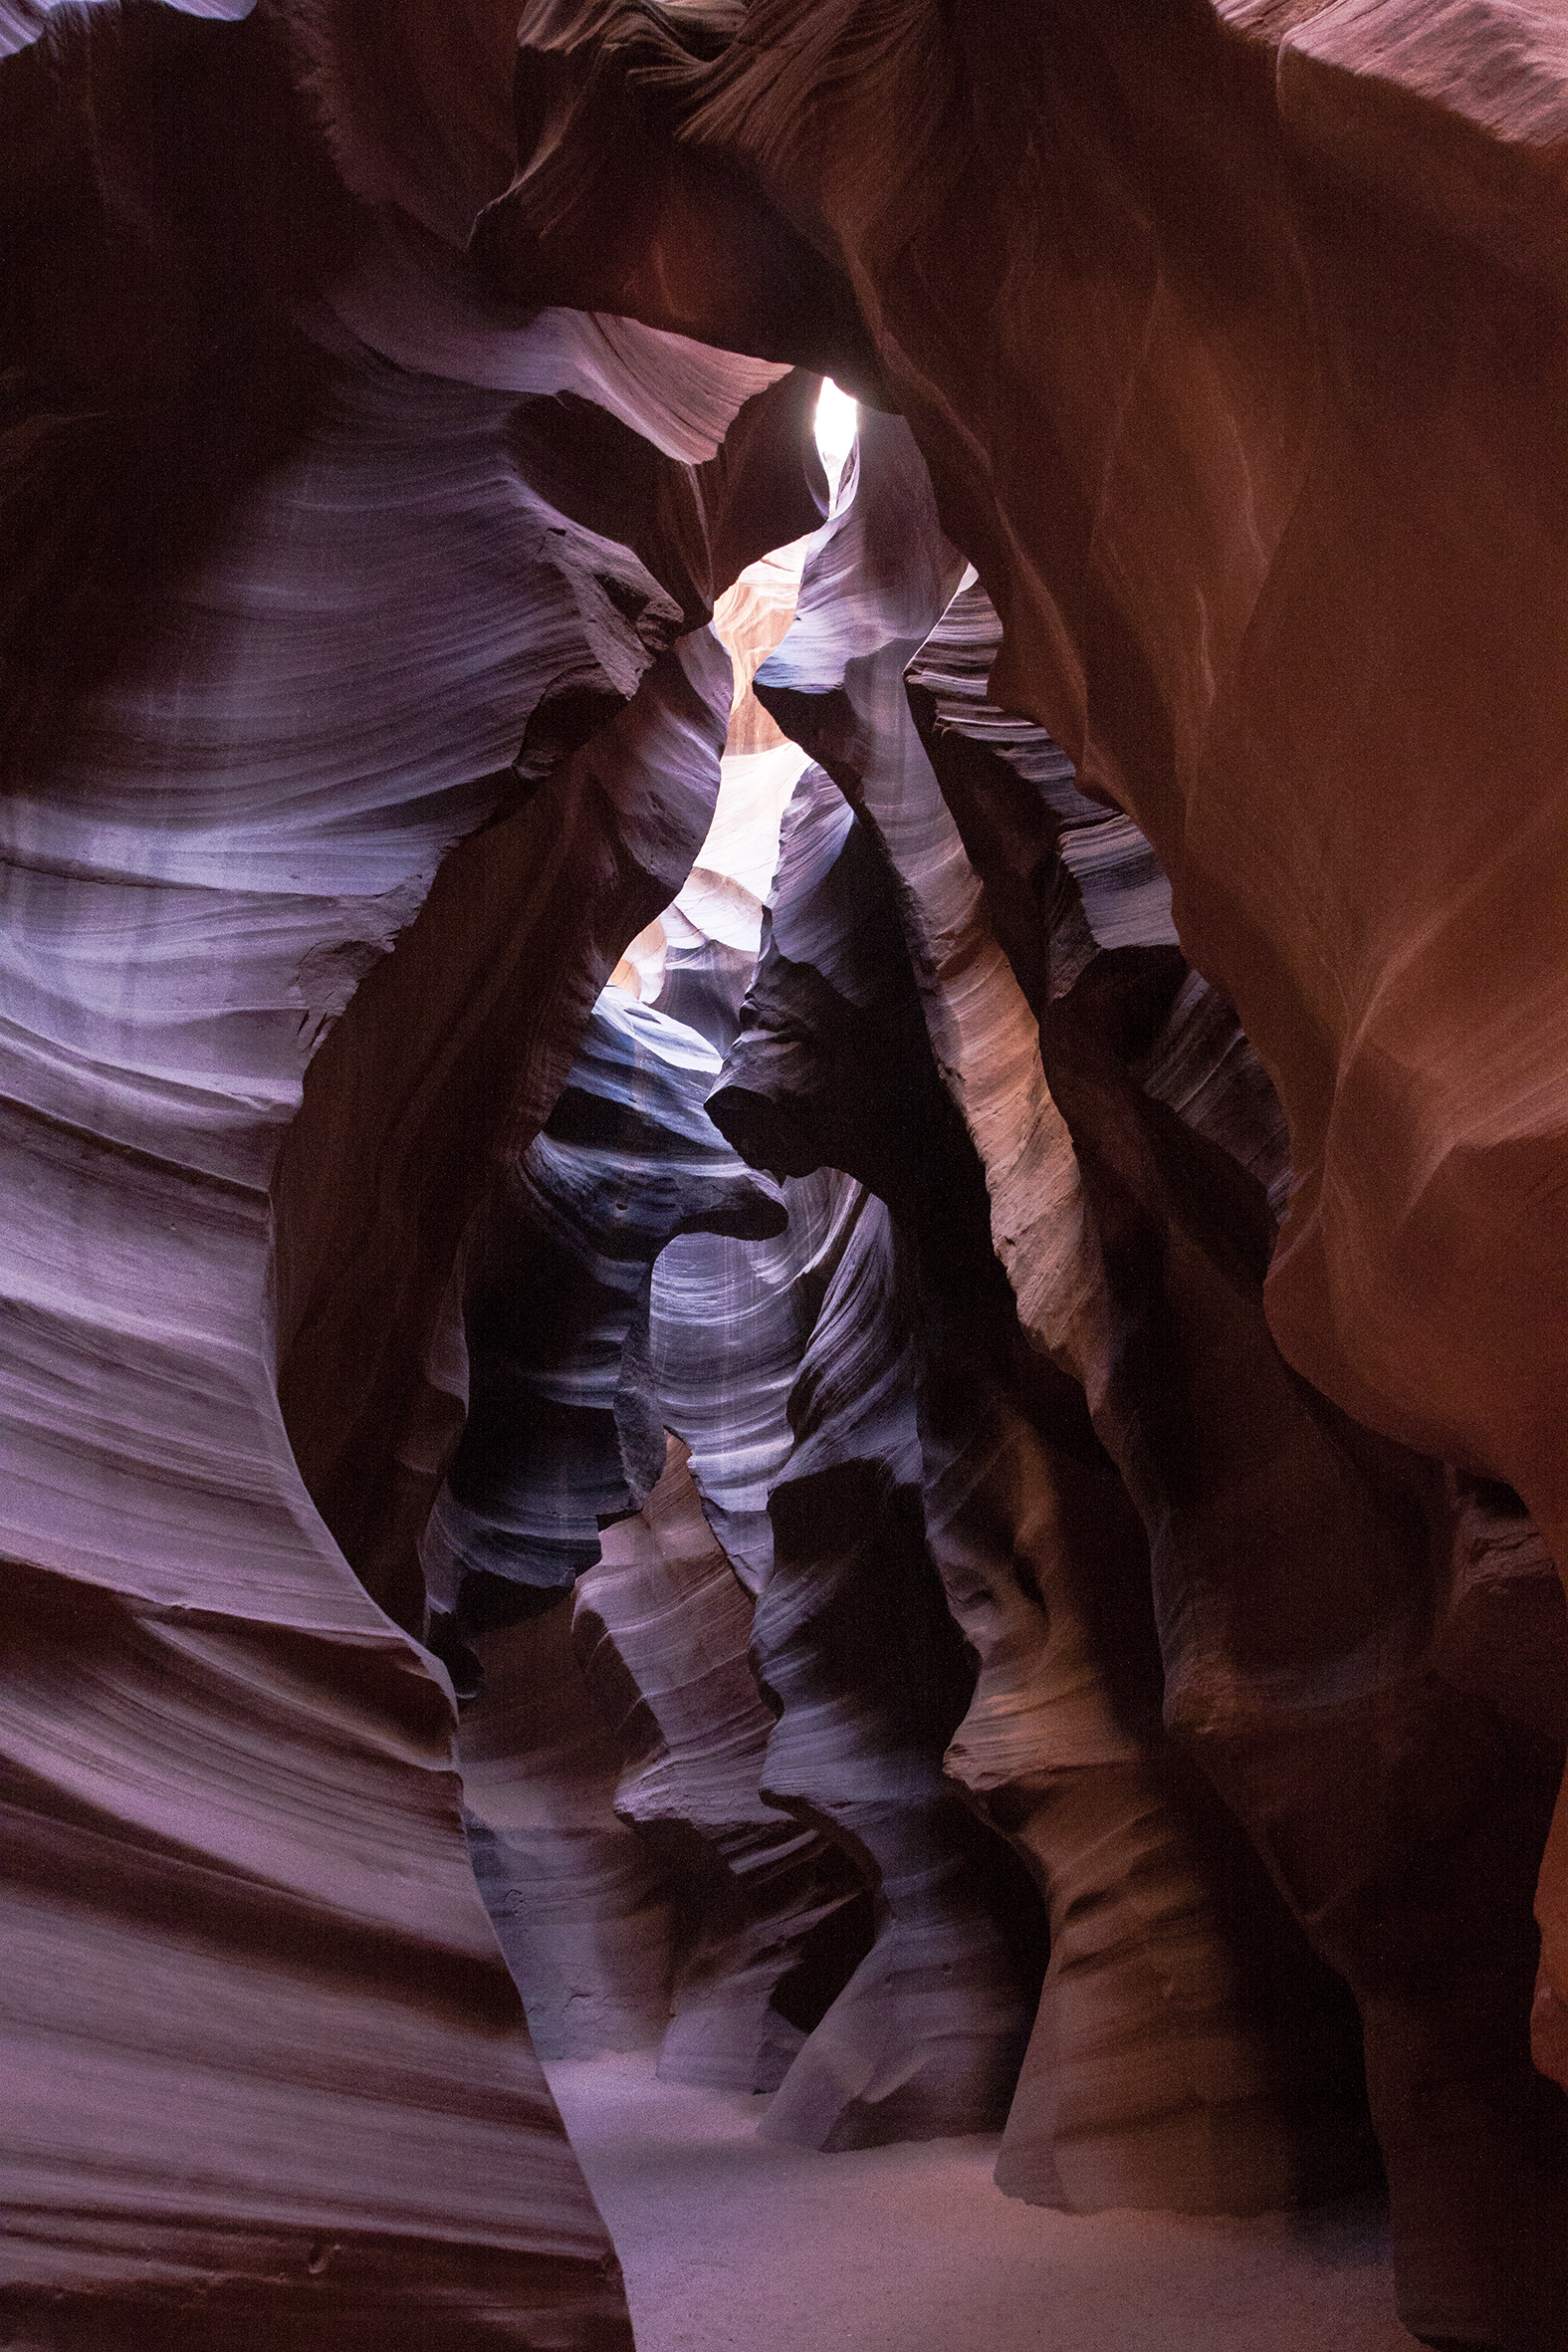 naturaliste-antelope-canyon-reserve-navajo-usa-ouest-2012-marie-colette-becker-11